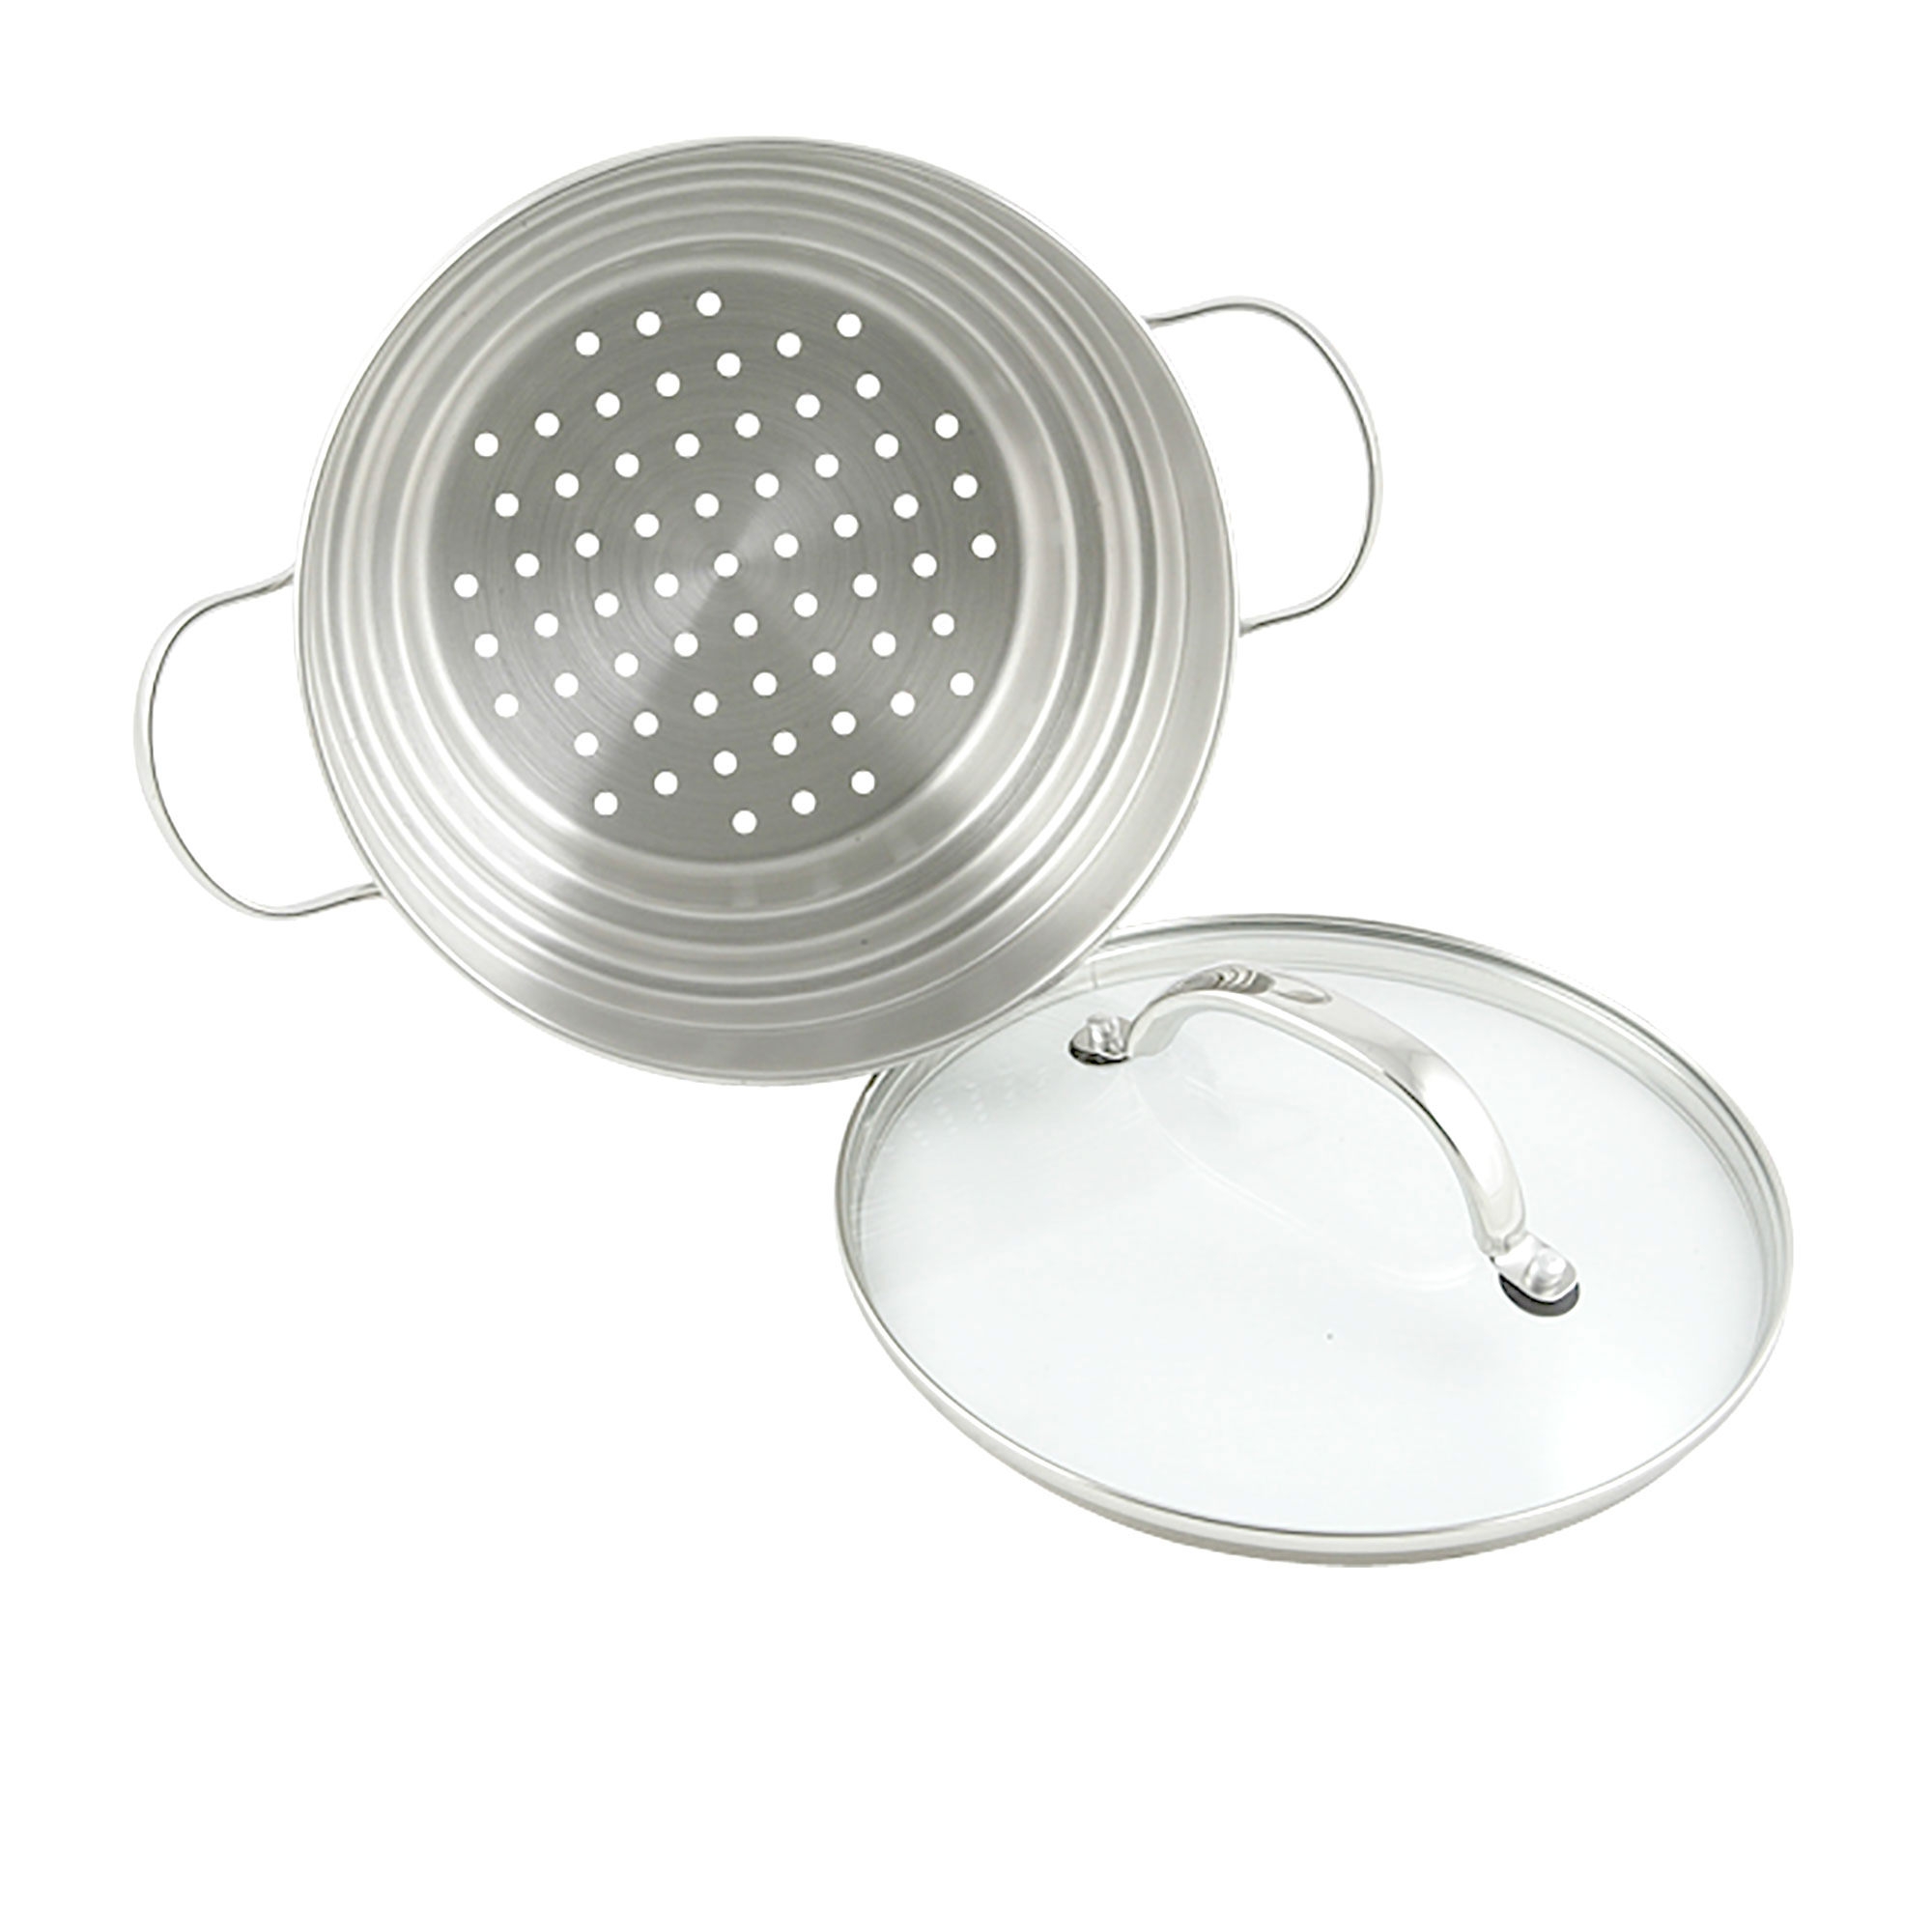 Raco Contemporary Stainless Steel Universal Steamer With Lid Image 1